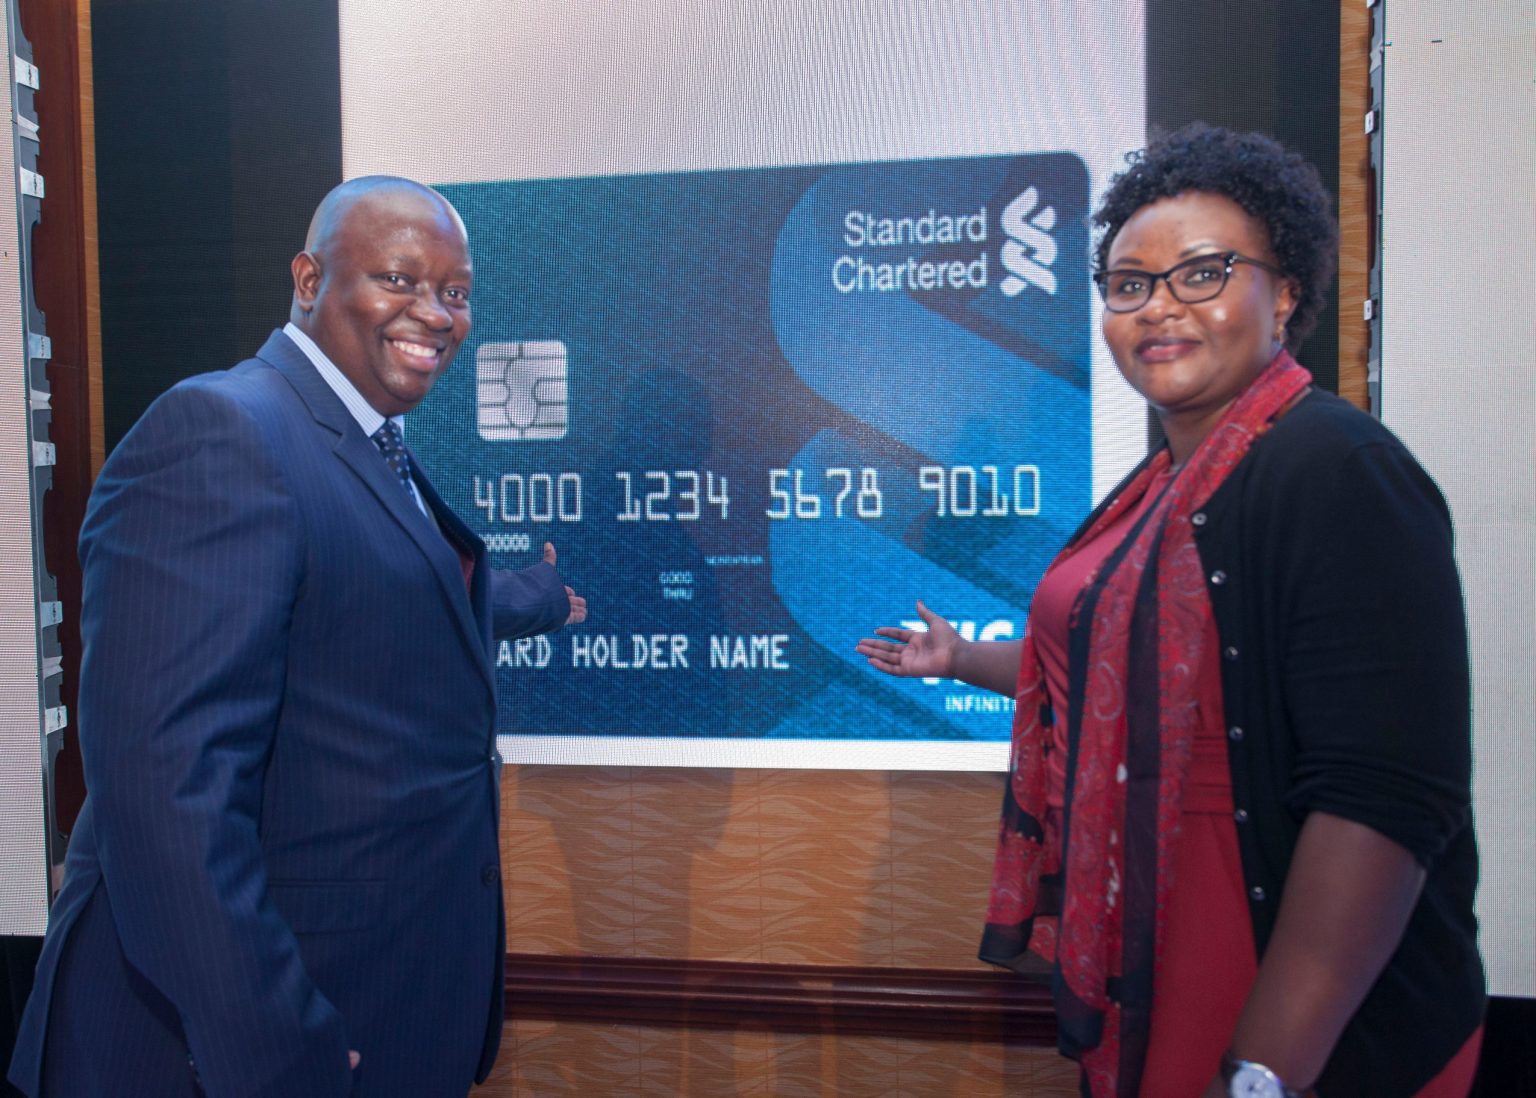 Standard Chartered Bank (SCB) Kenya has launched a prestigious product offering - the Standard Chartered Visa Infinite credit card.